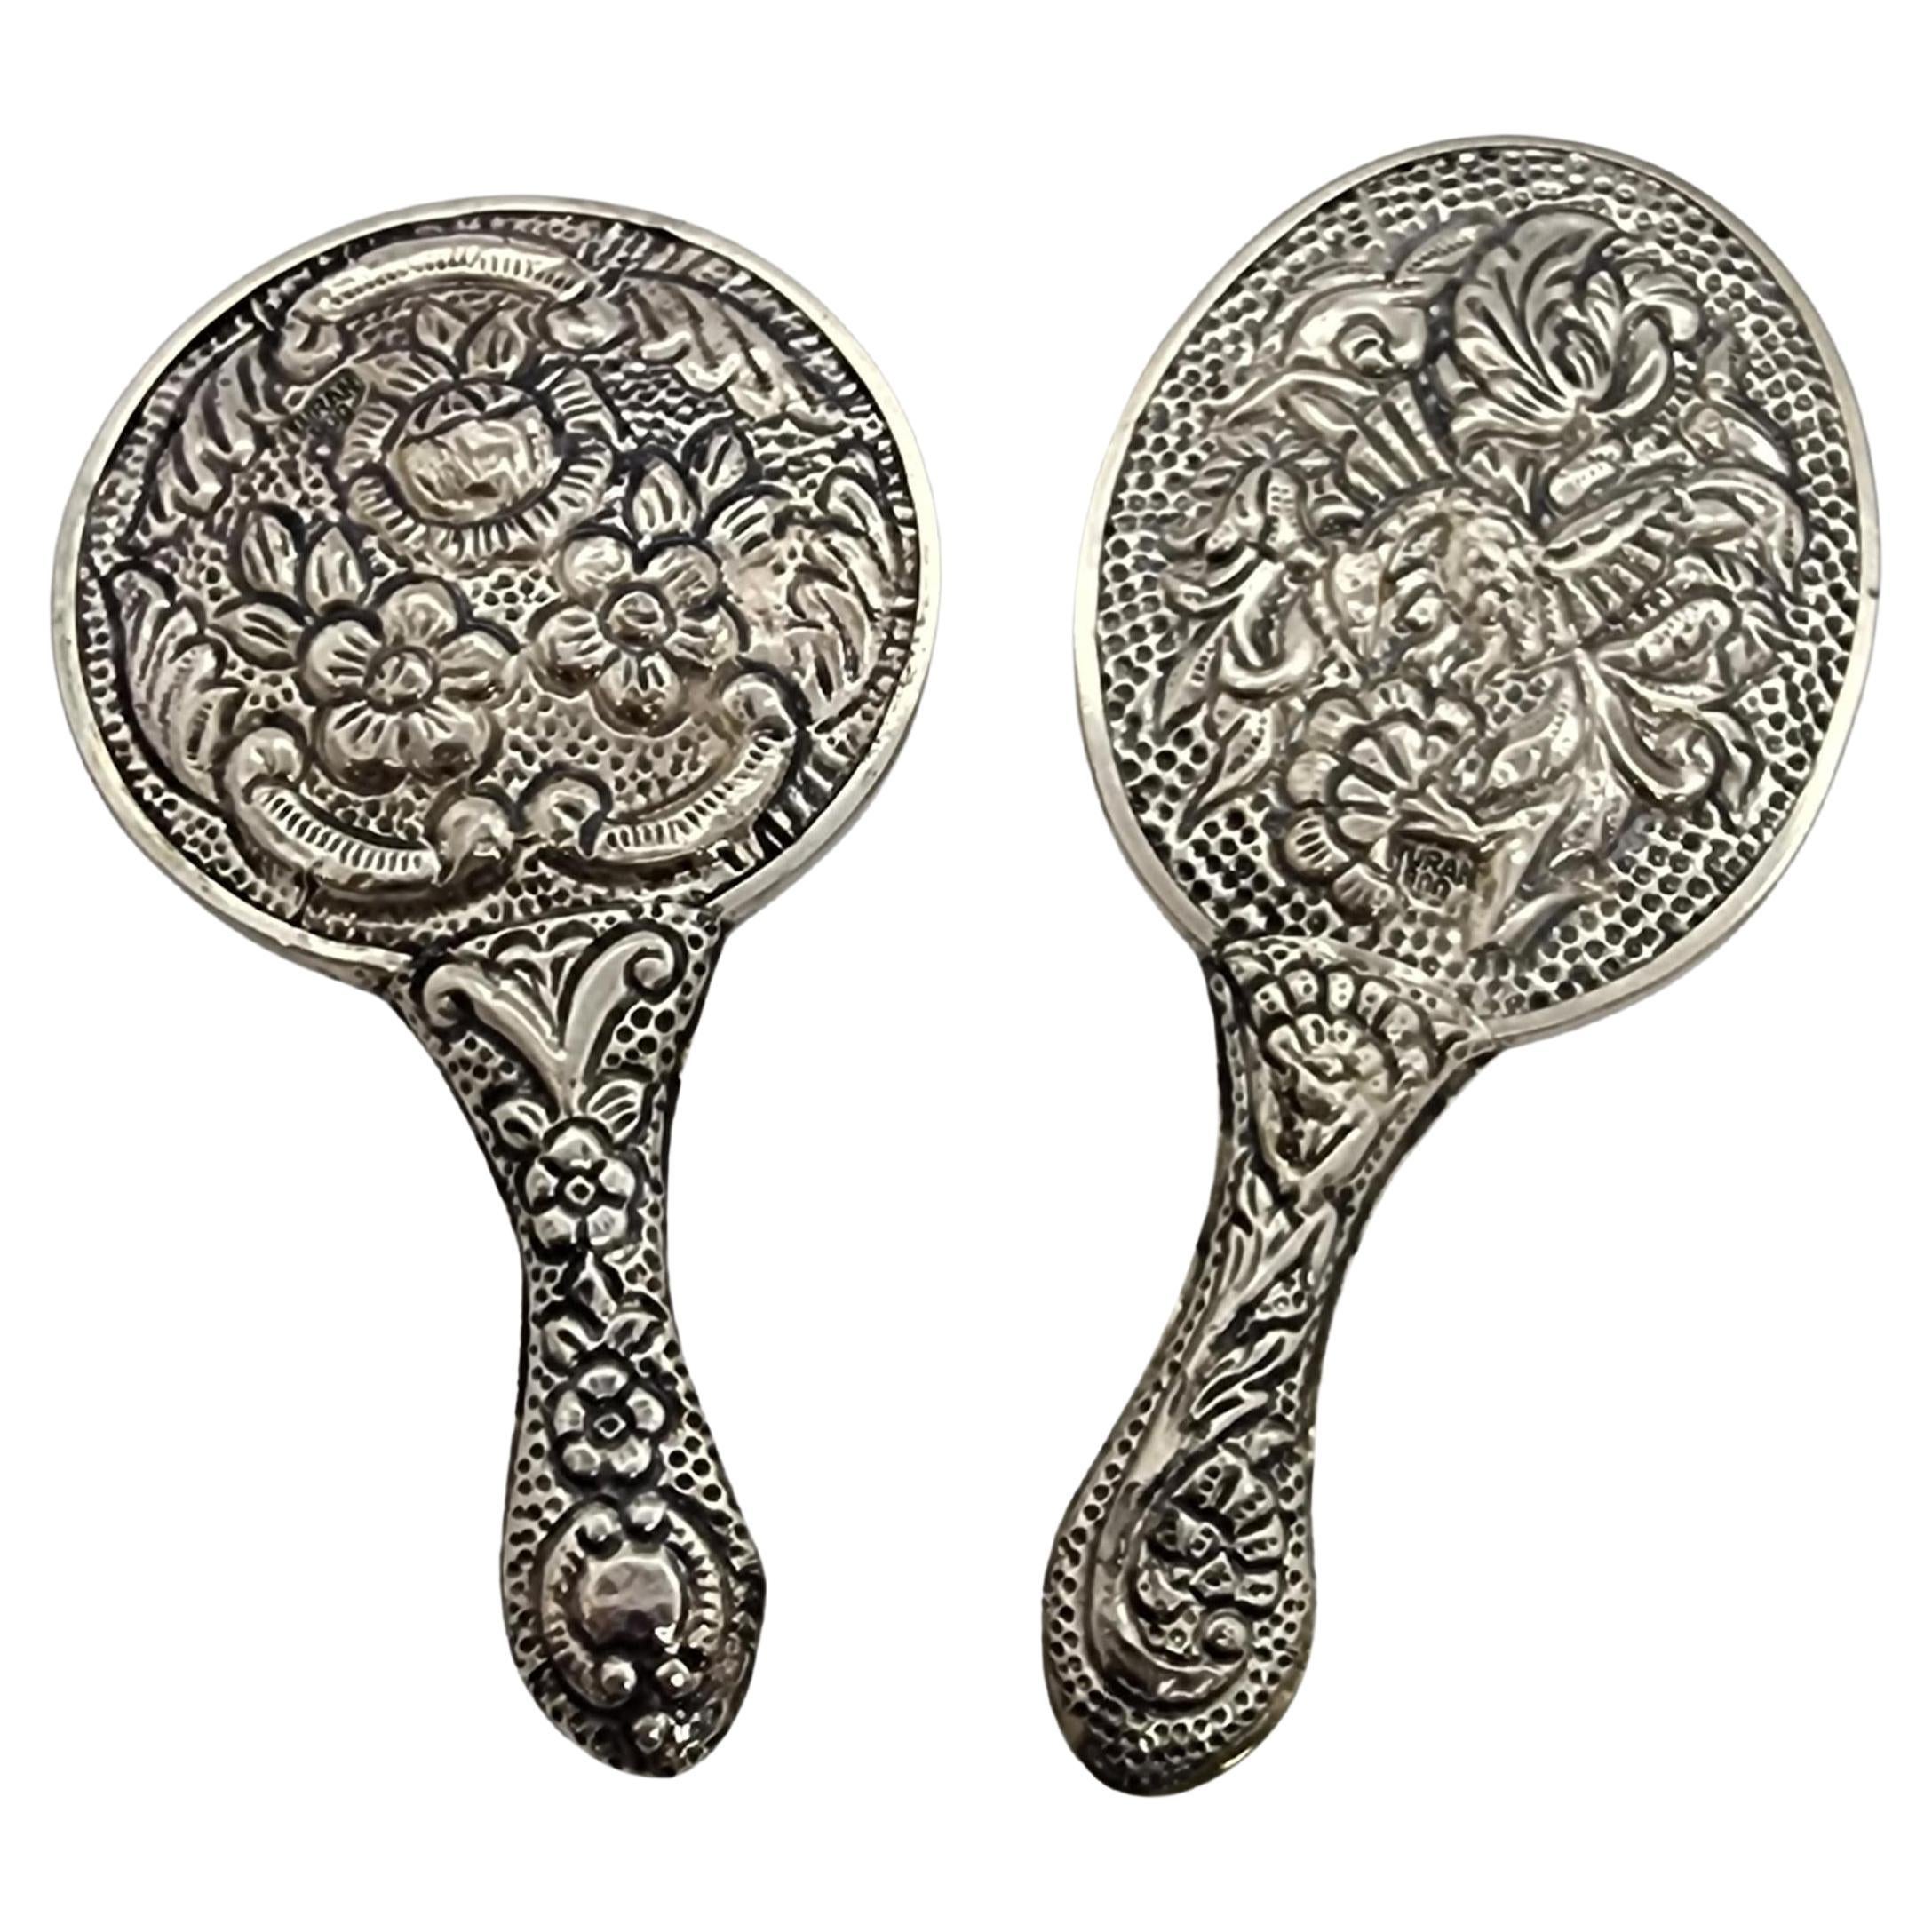 Set of 2 Turan Turkey 900 Silver Repousse Hand Mirrors #15964 For Sale